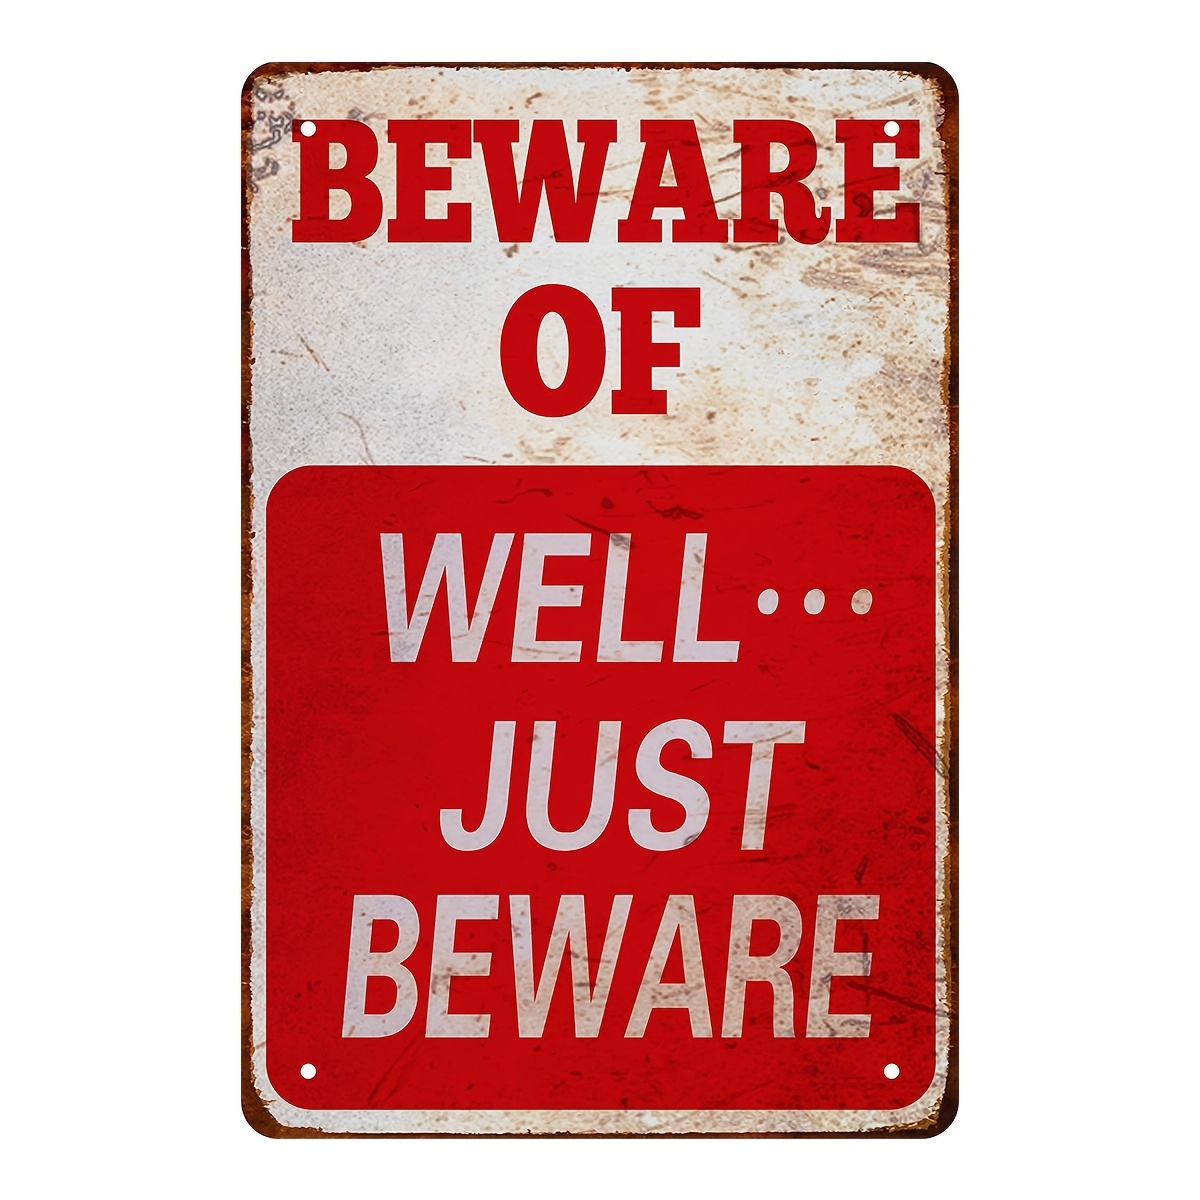 1pc Beware Tin Sign Beware Of Well Just Funny Novelty Tin Sign Vintage Metal Sign Garage Signs Men Cave Home Decor Art Decor 8x12in